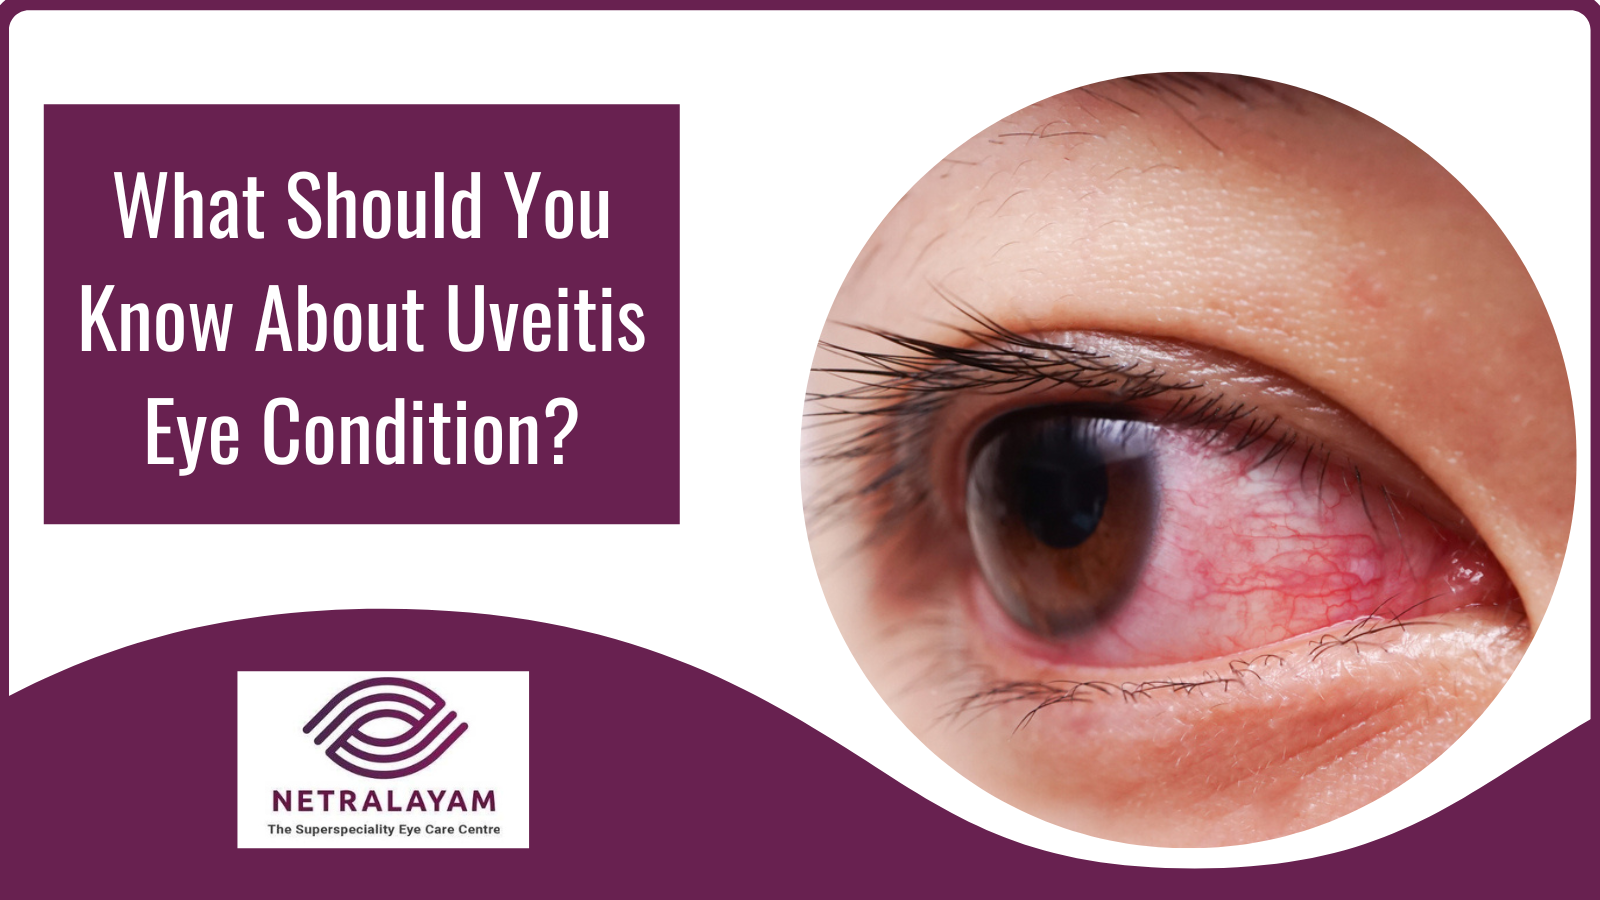 What Should You Know About Uveitis Eye Condition?